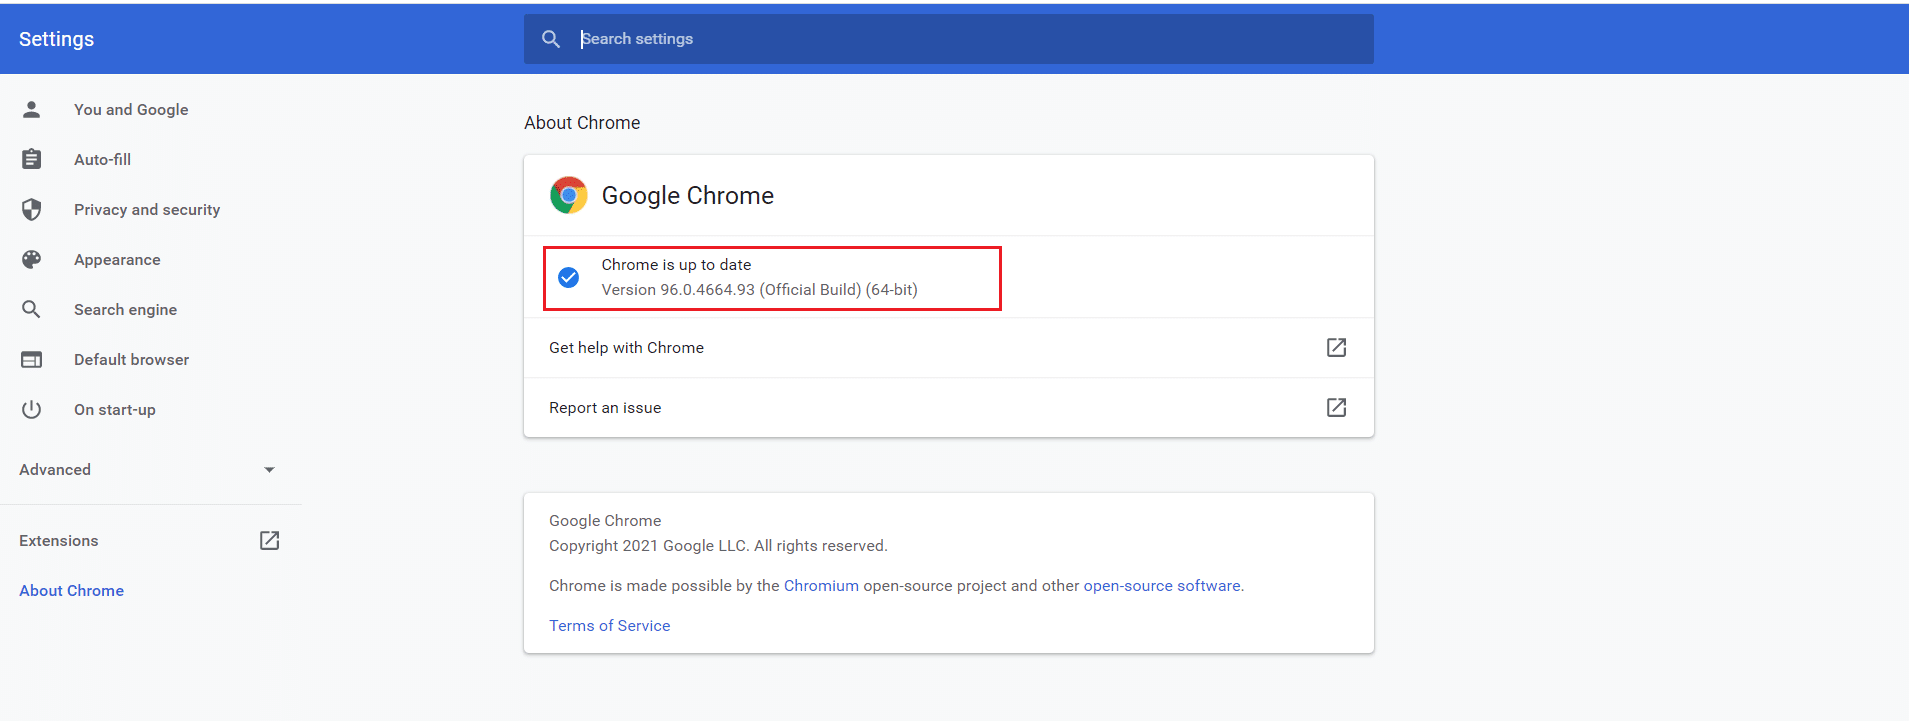 Chrome is up to date Dec 2021. Fix Err Empty Response in Google Chrome